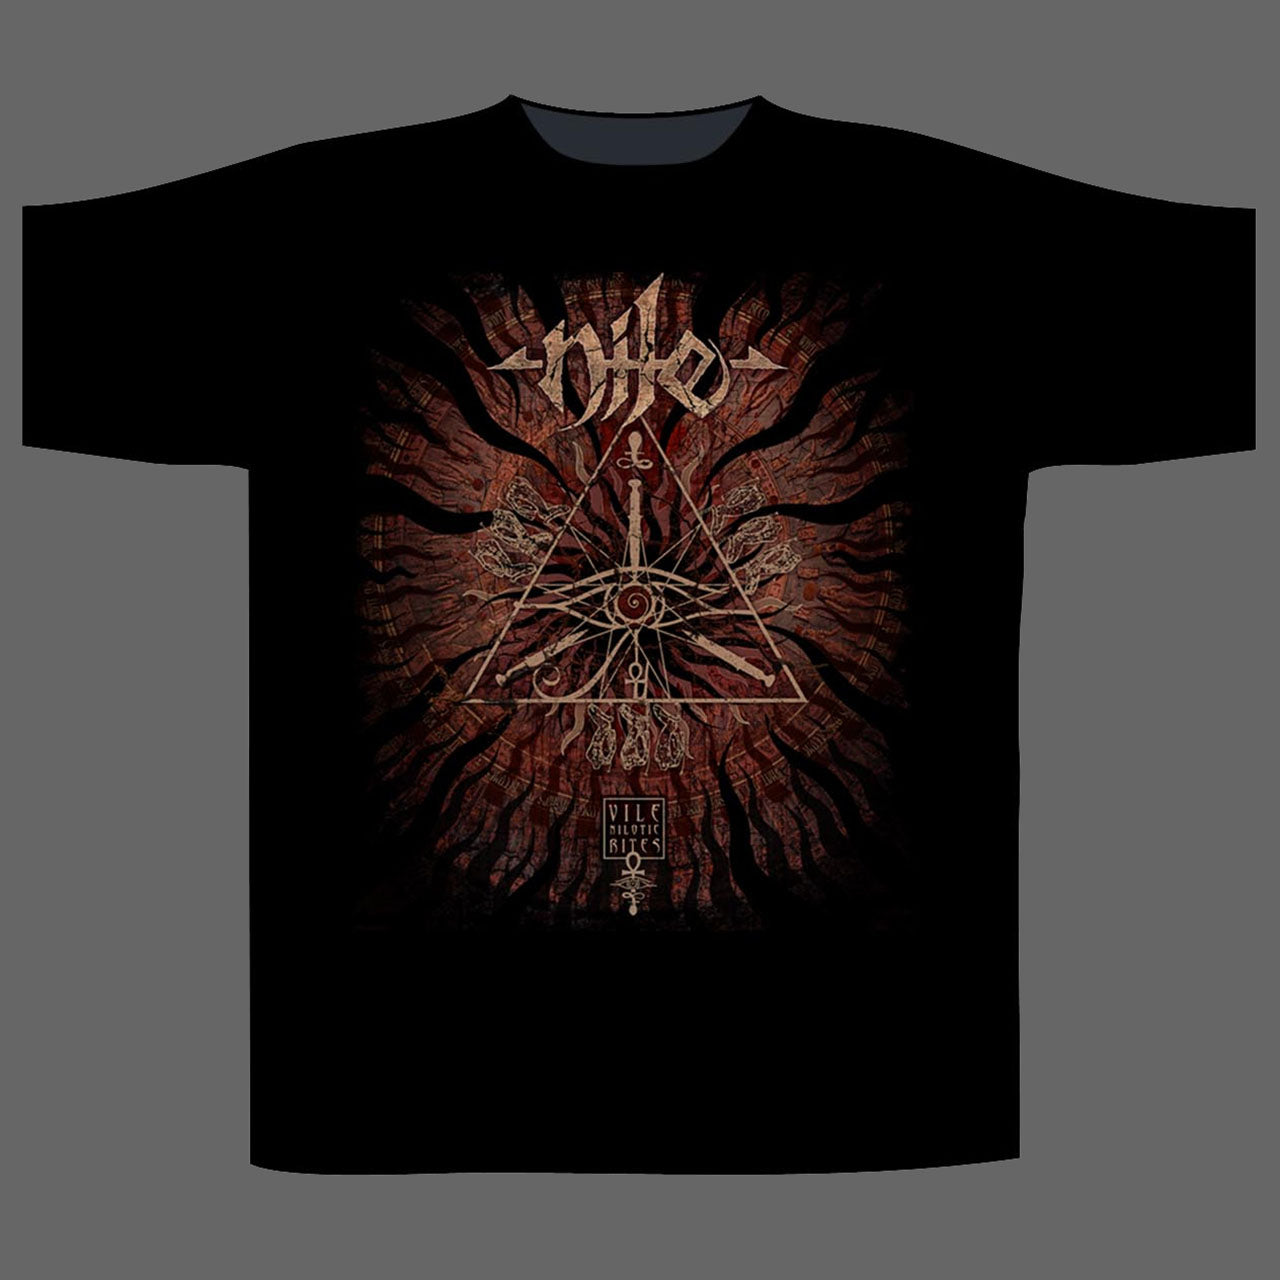 Nile - Vile Nilotic Rites (What One Worships One Becomes) (T-Shirt)